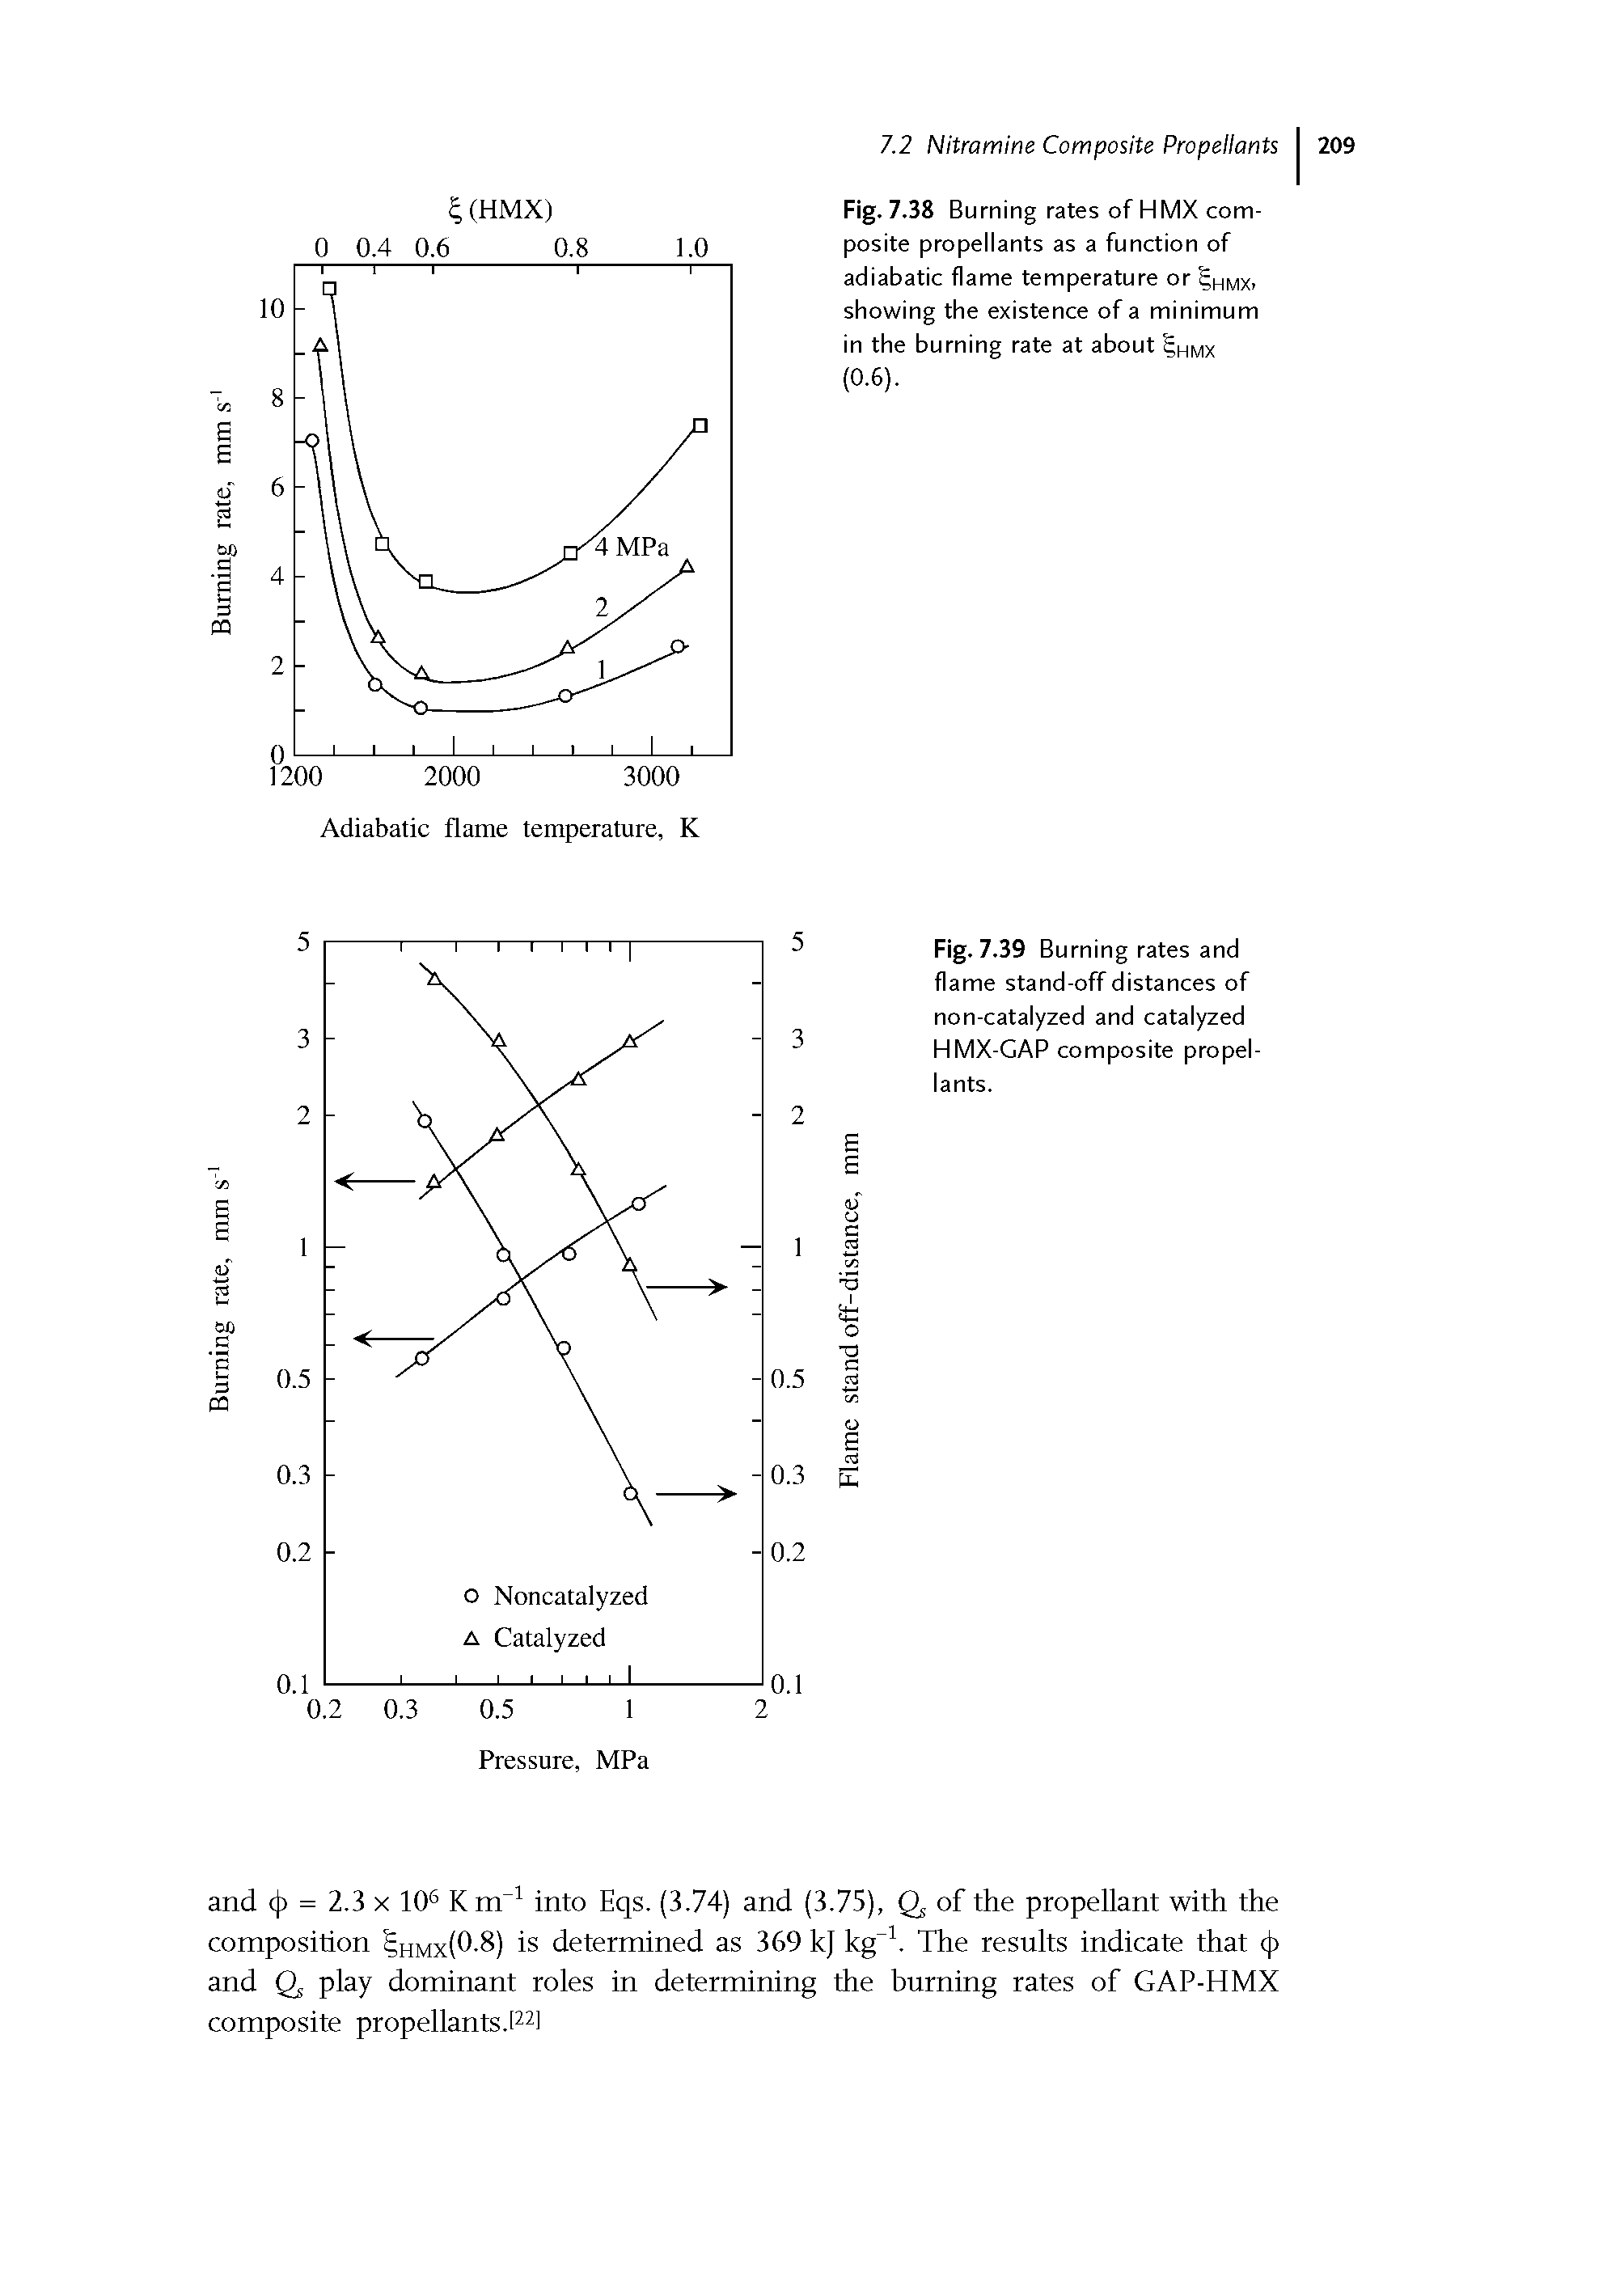 Fig. 7.39 Burning rates and flame stand-off distances of non-catalyzed and catalyzed HMX-GAP composite propellants.